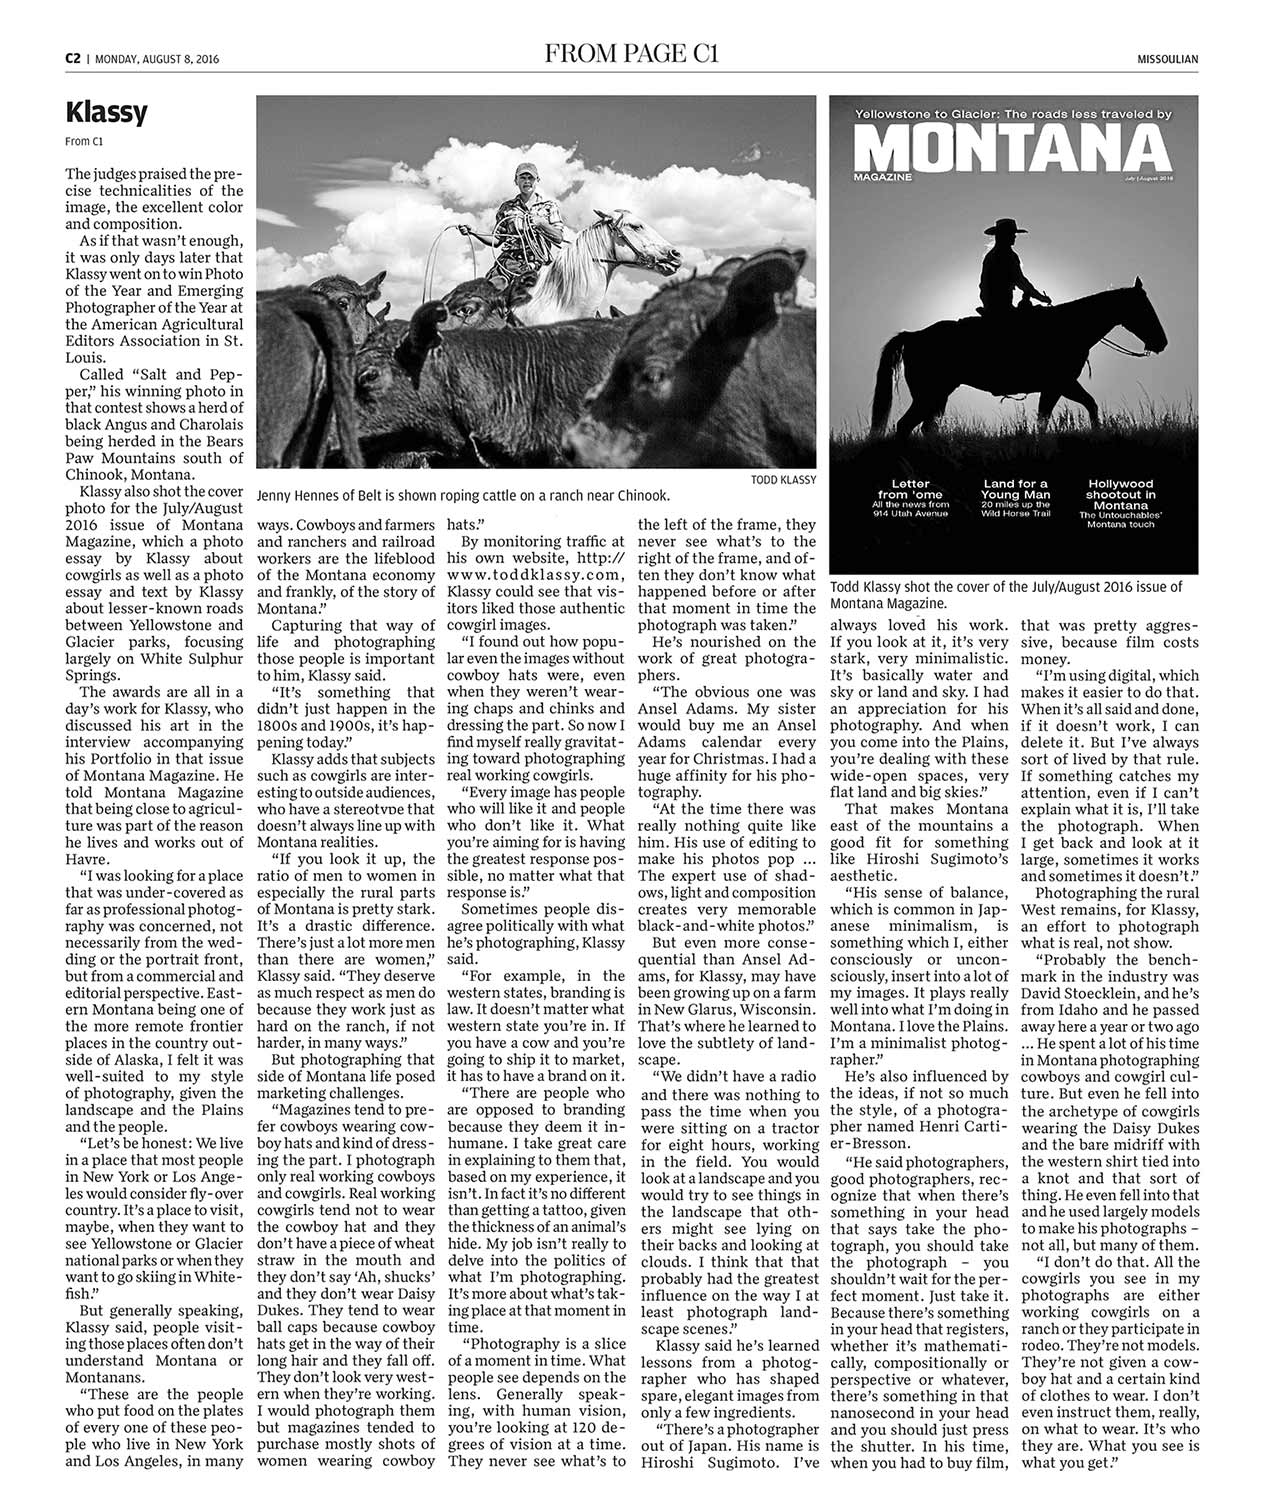 Second Page of Article in Missoulian About Todd Klassy Photography.jpg